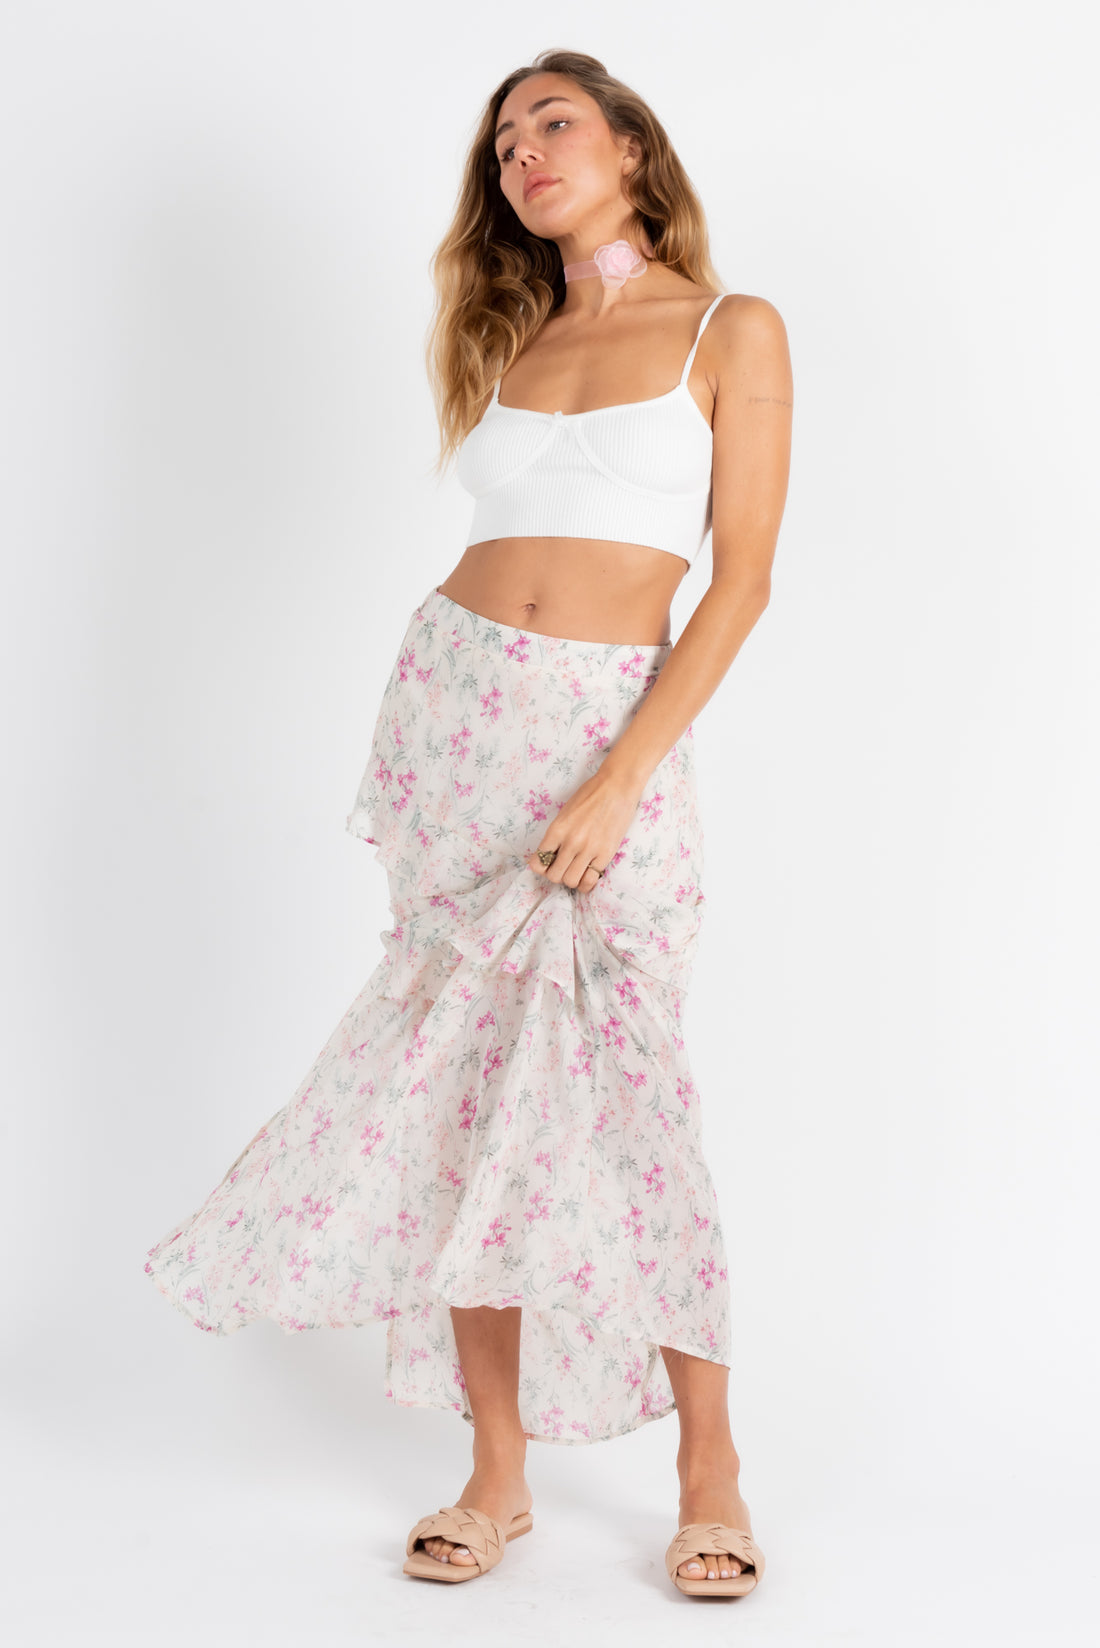 Blooms Floral Tiered Ruffle Maxi Skirt/Dress